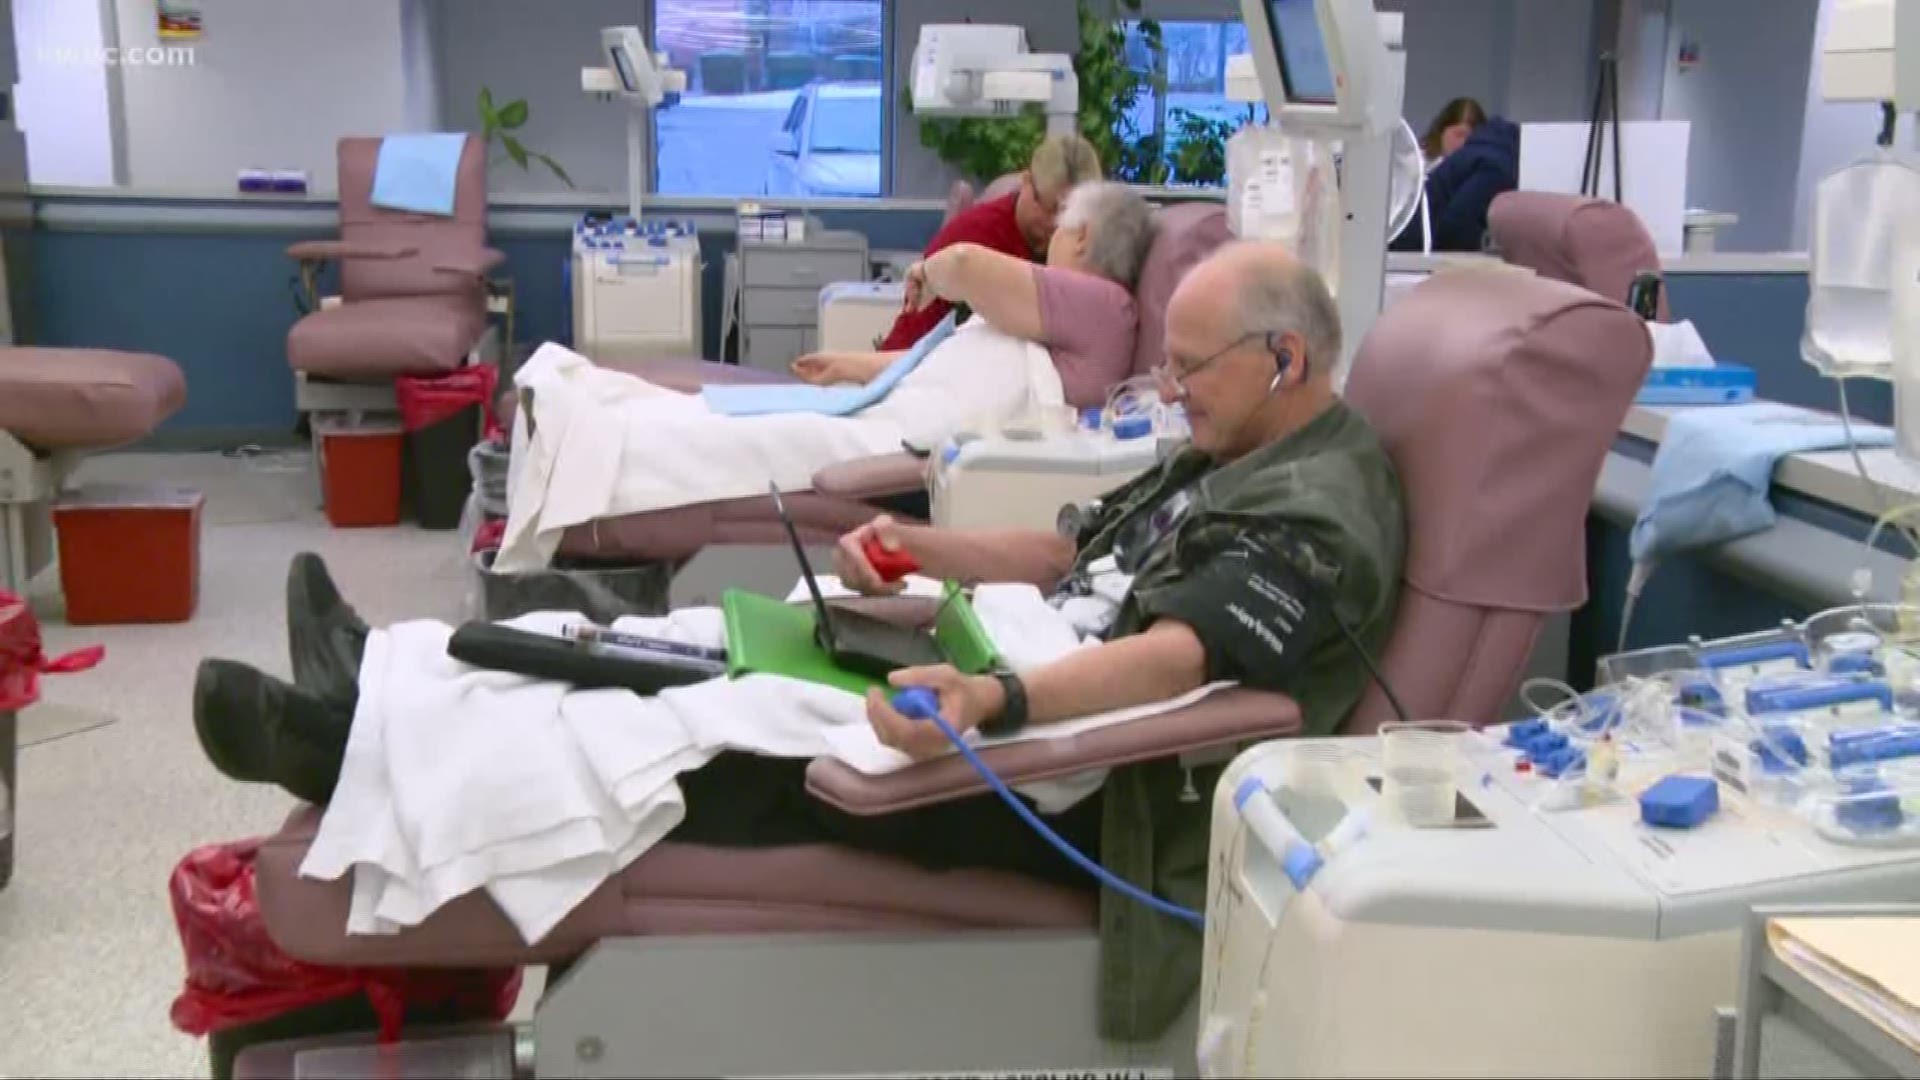 Nov. 13, 2018: The American Red Cross is facing a severe blood shortage and urgently needs blood and platelet donors to give now to avoid delays in lifesaving medical care for patients.